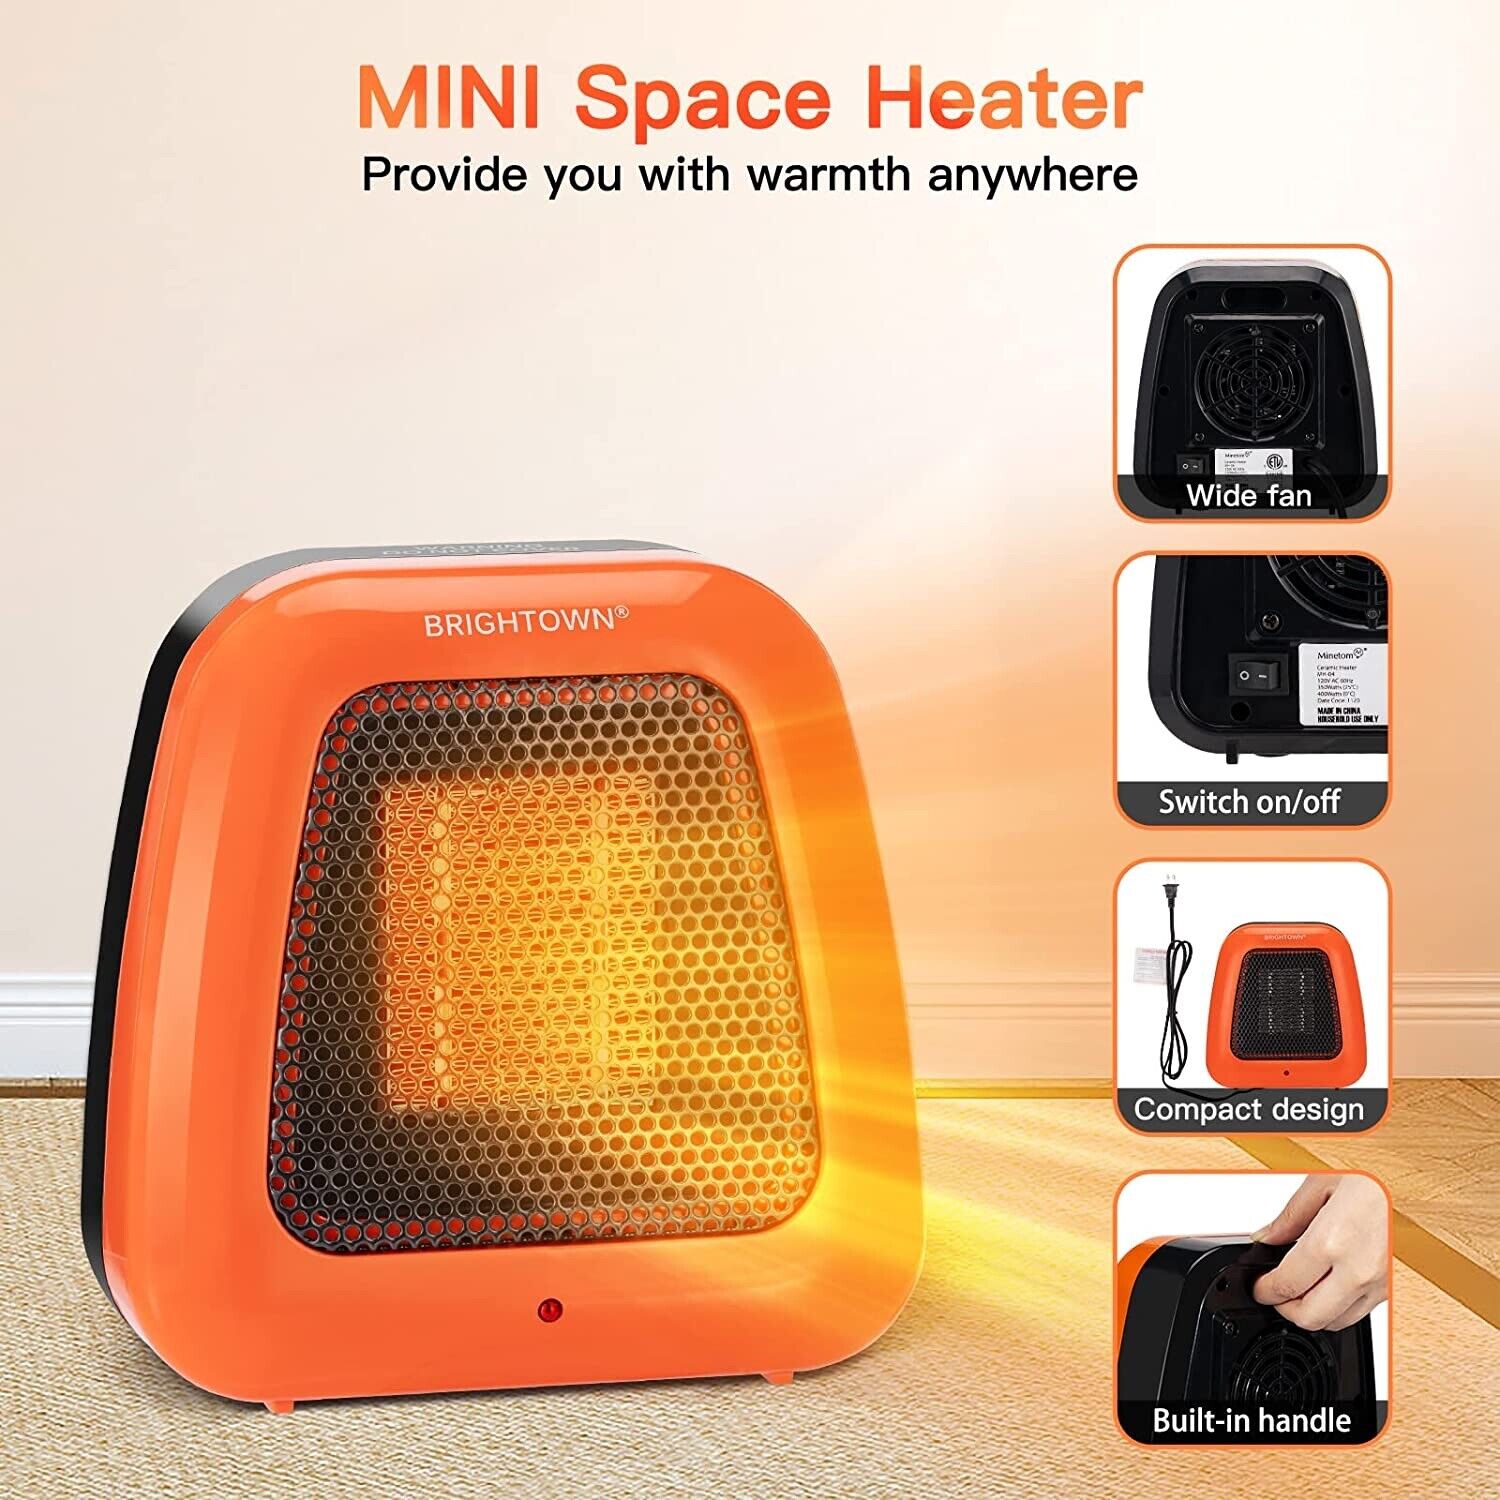 Personal Portable Small Space Heater Indoor Use 400W Mini Heater